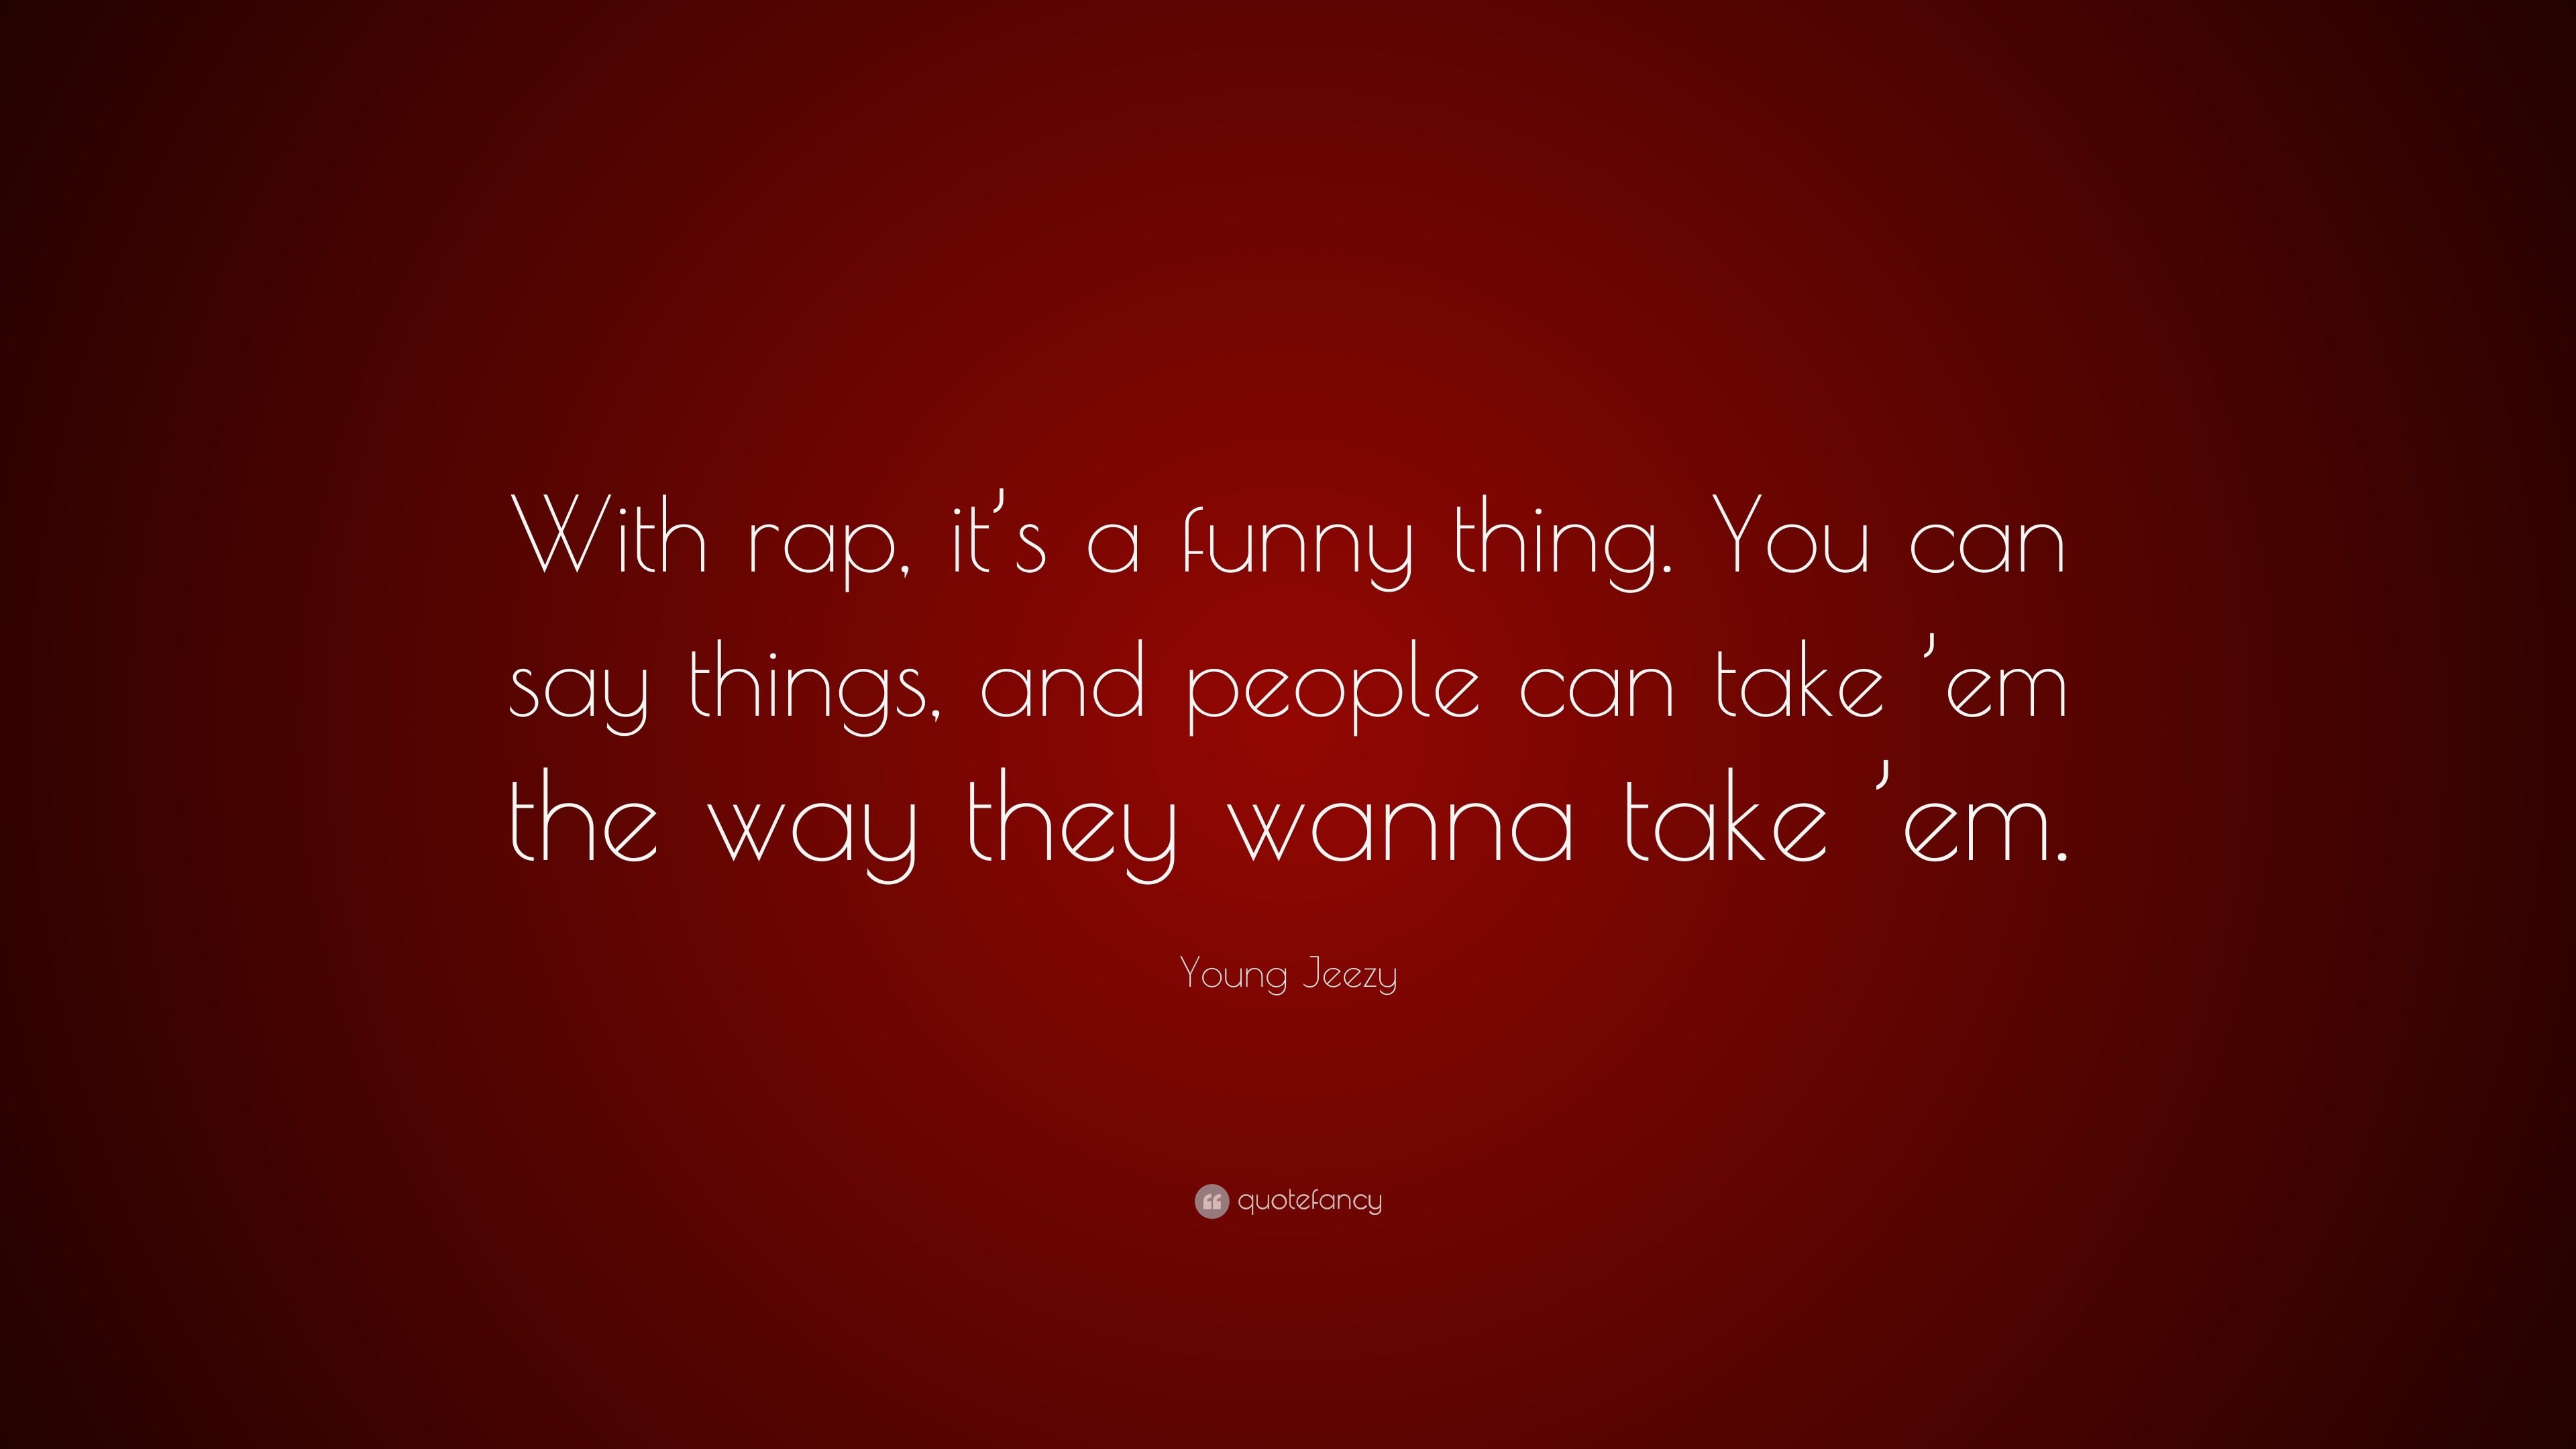 Young Jeezy Quote: “With rap, it's a funny thing. You can say things, and  people can